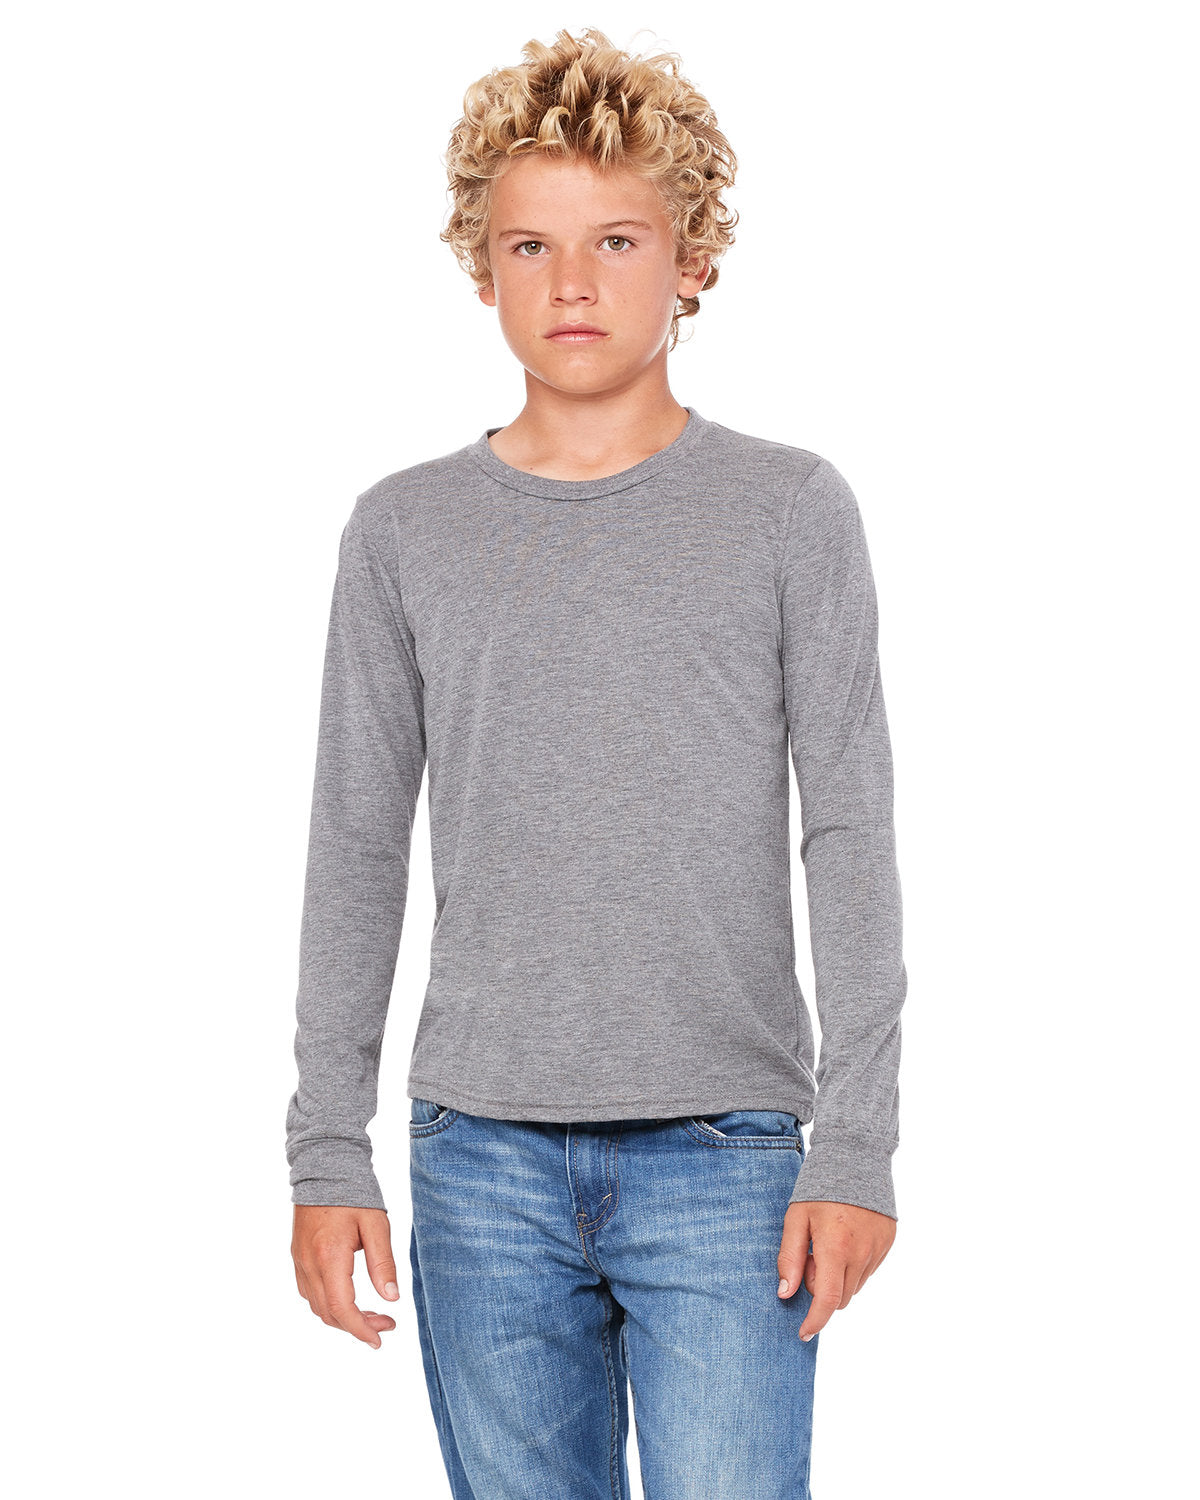 UNLEASH-THEIR-STYLE-AND-COMFORT-WITH-THE-BELLA-CANVAS-YOUTH-JERSEY-LONG-SLEEVE-T-SHIRT